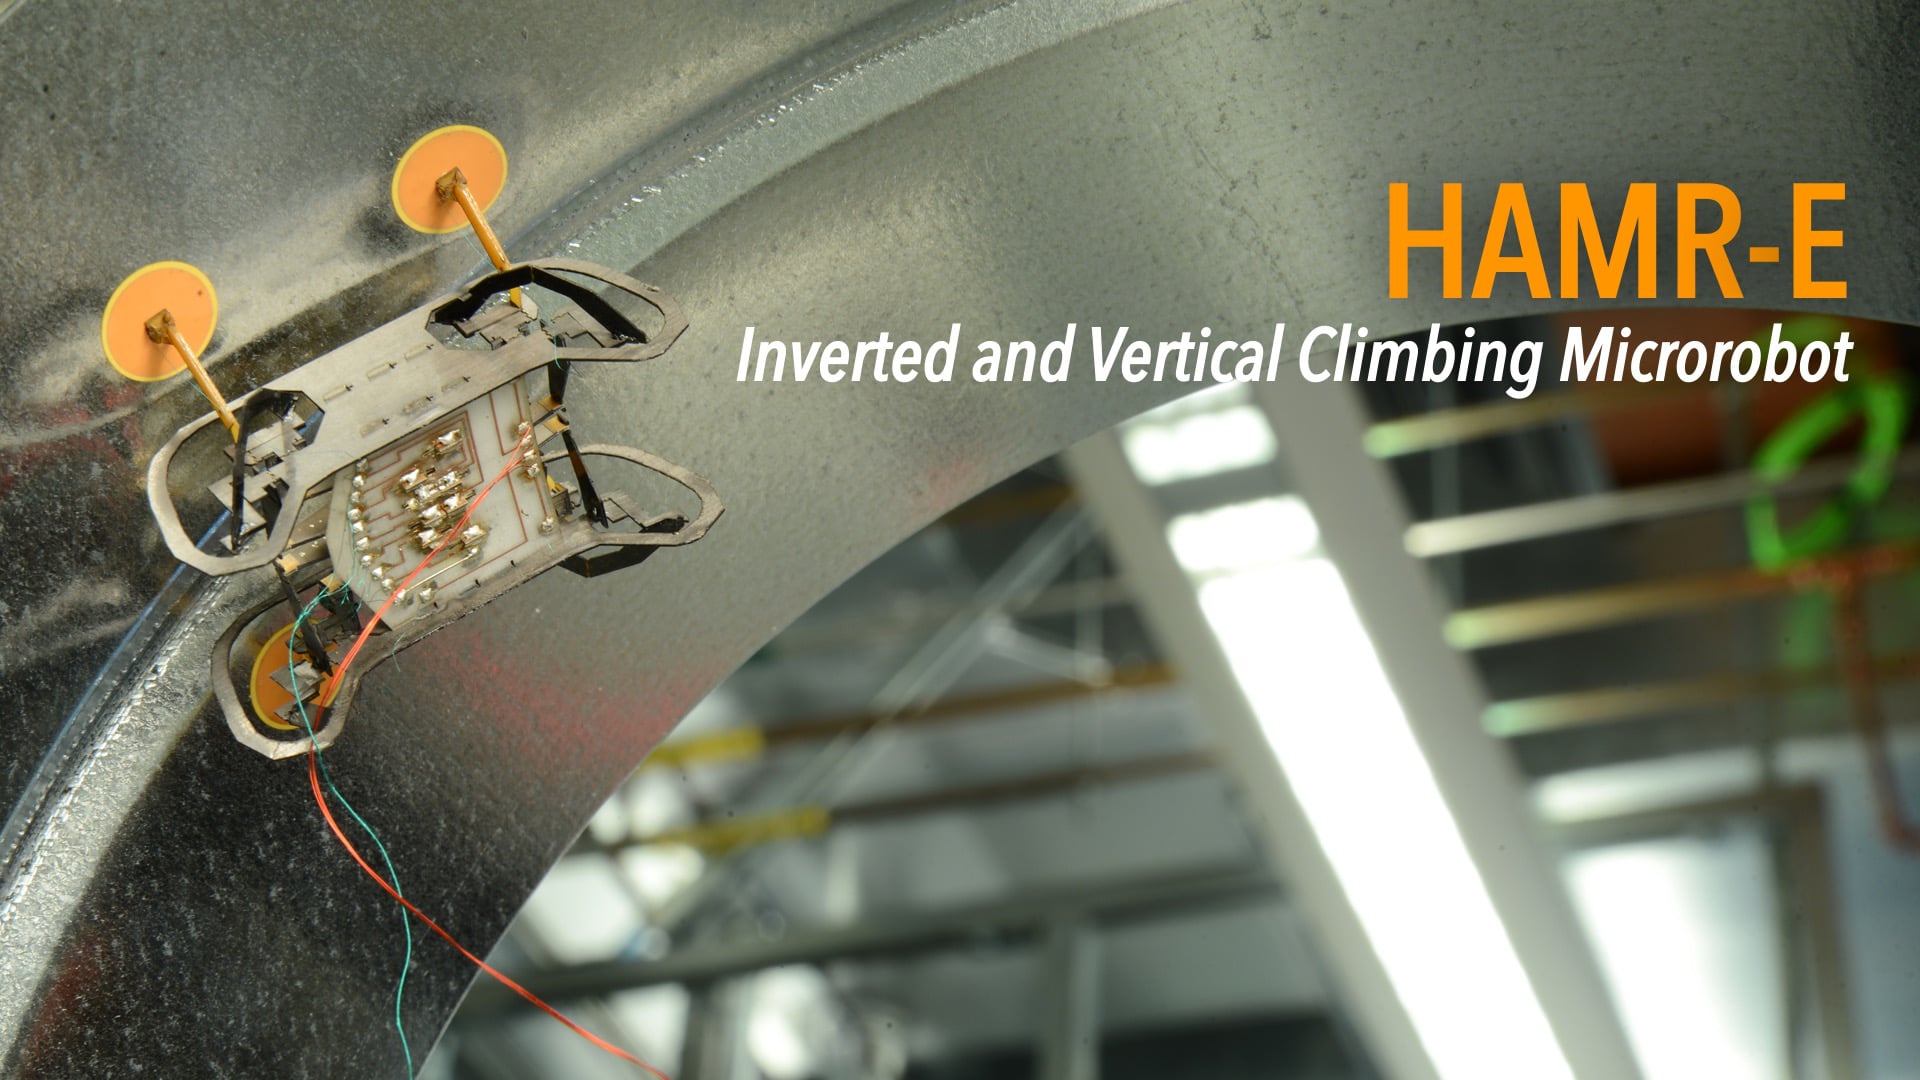 HAMR-E: Inverted and Vertical Climbing Microrobot